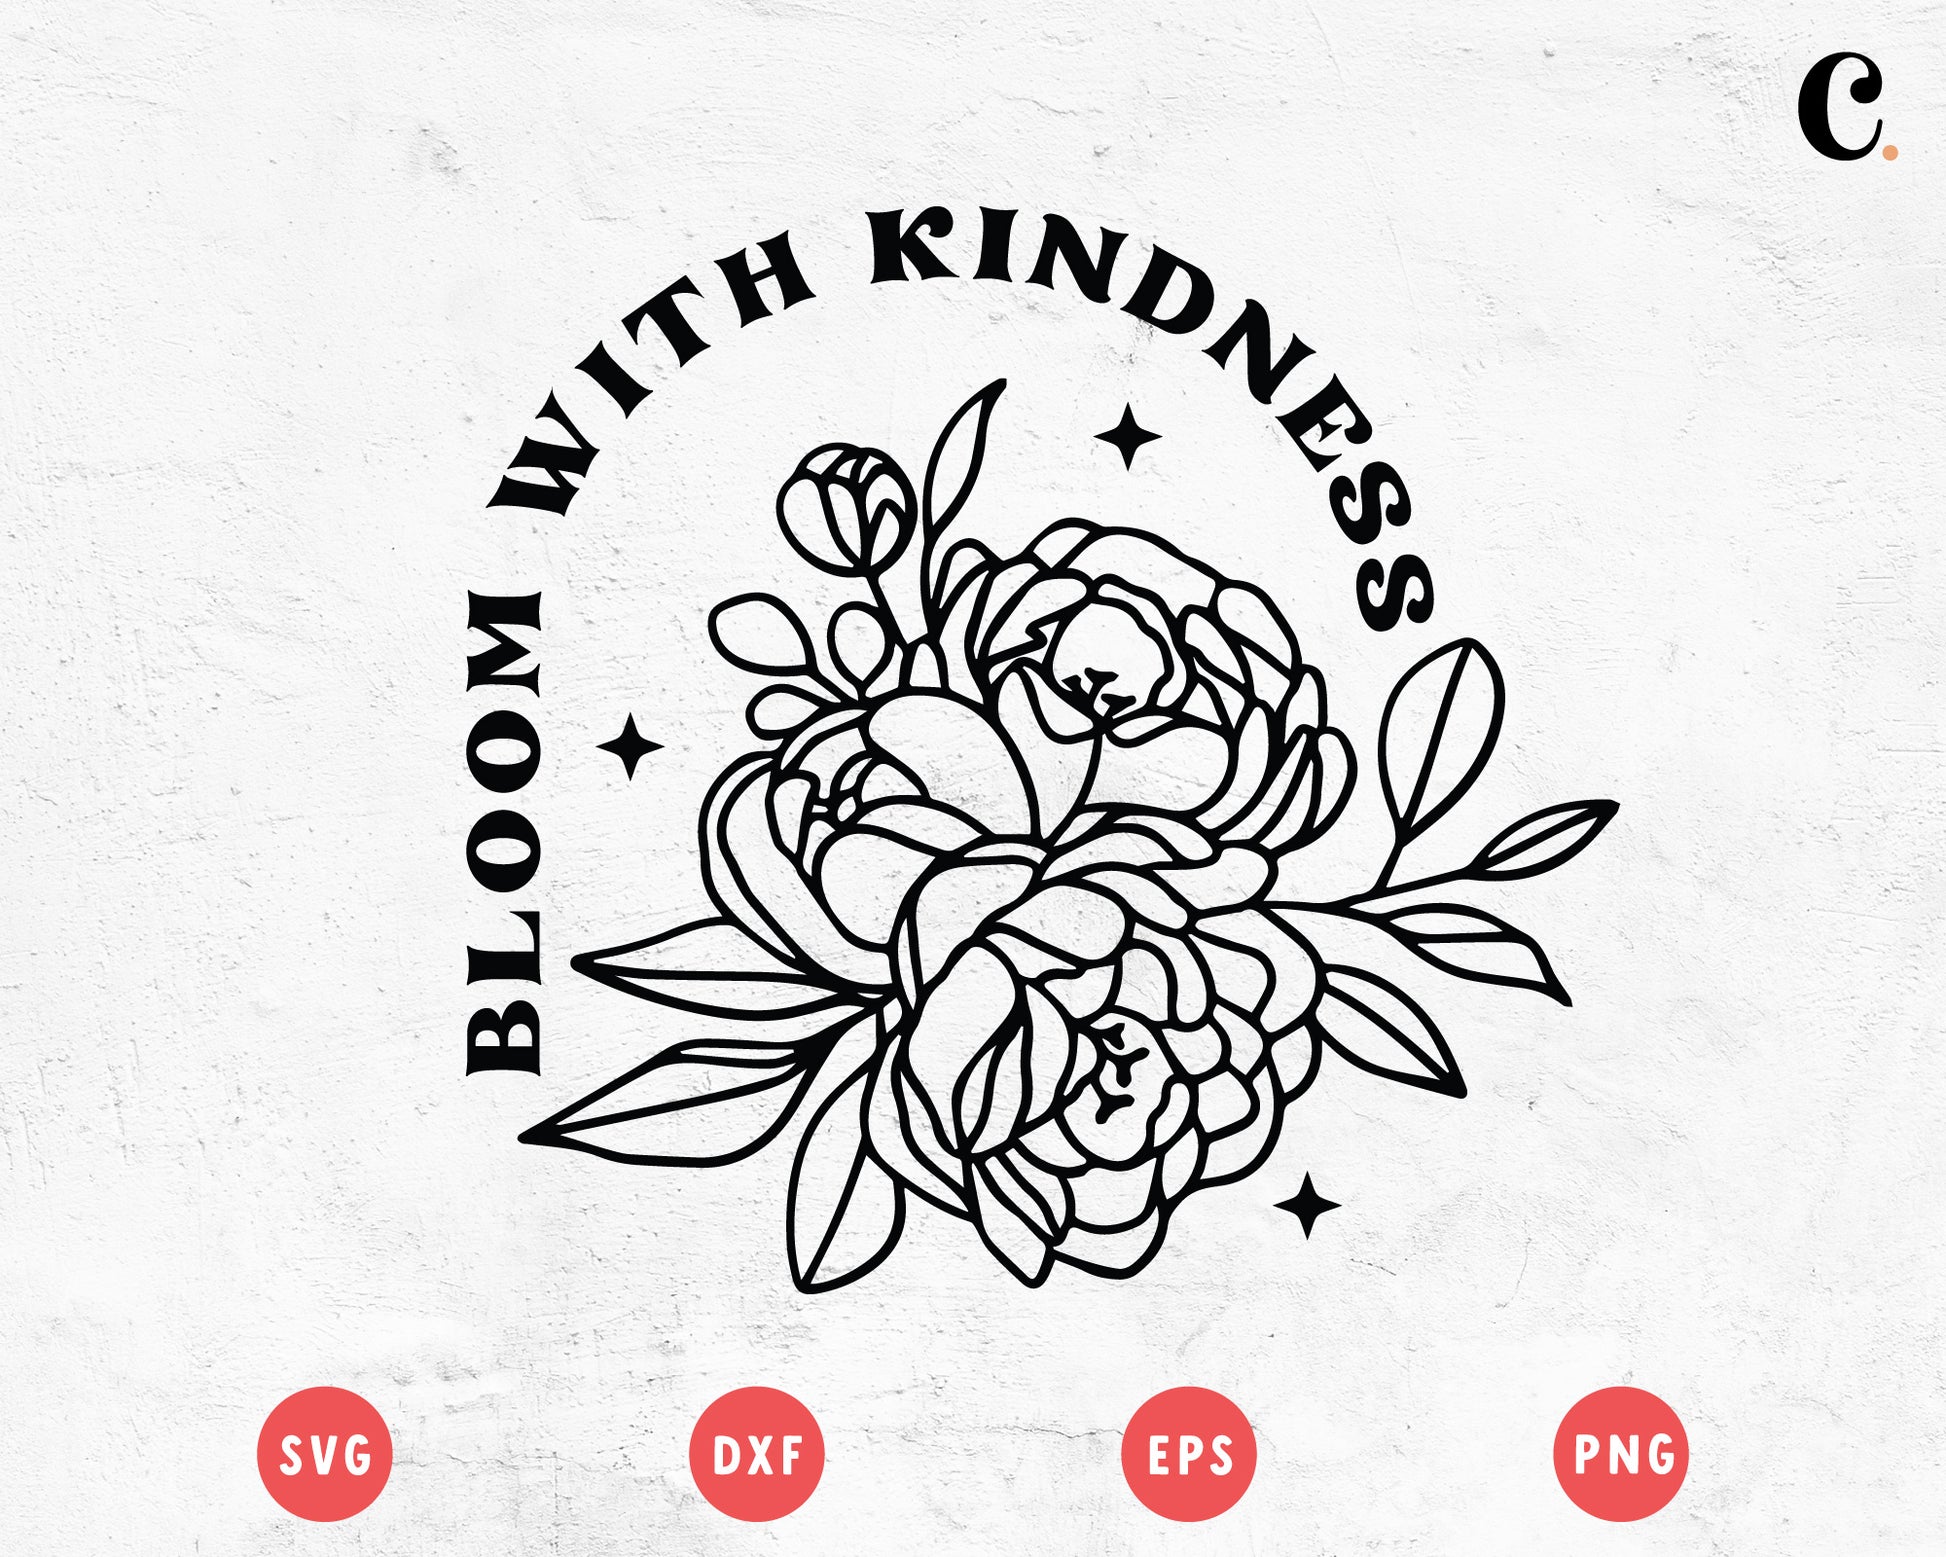 Boho Flower SVG |  Bloom With Kindness SVG Cut File for Cricut, Cameo Silhouette